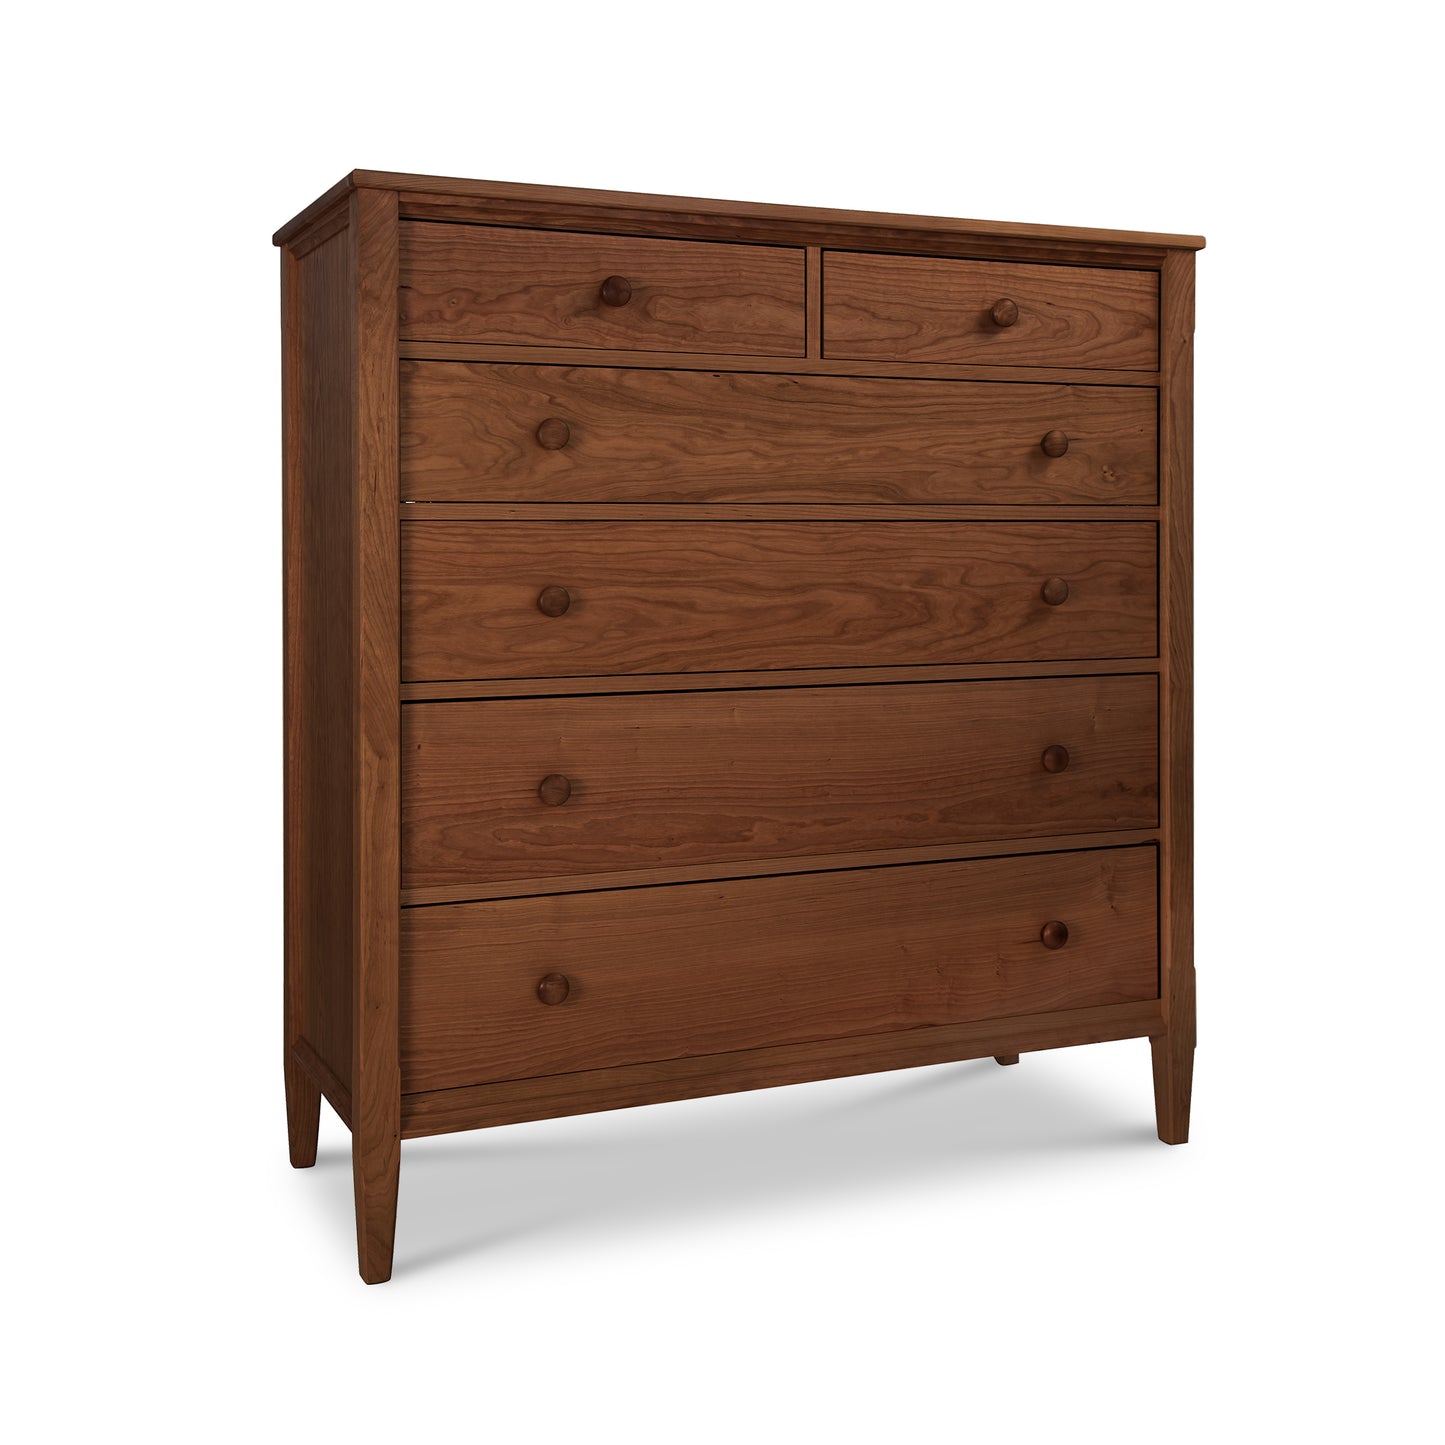 A Vermont Shaker Extra Wide Chest with six drawers, featuring a simple traditional design, isolated on a white background. (Brand Name: Maple Corner Woodworks)